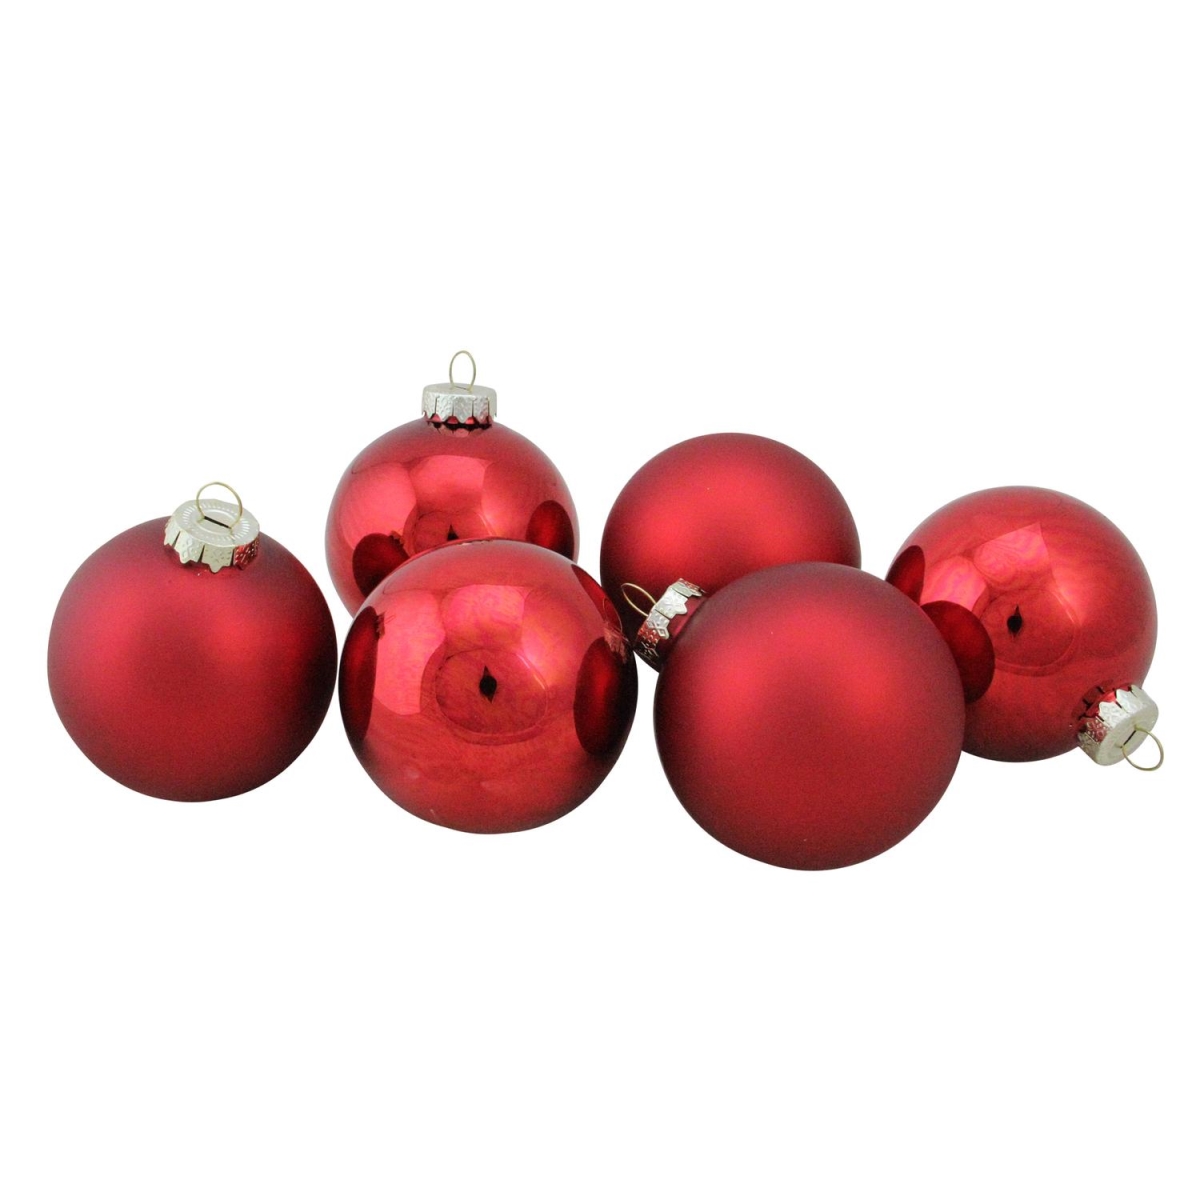 Northlight 32627436 3.25 in. Glass Ball Christmas Ornament Set, Red - 6 Piece